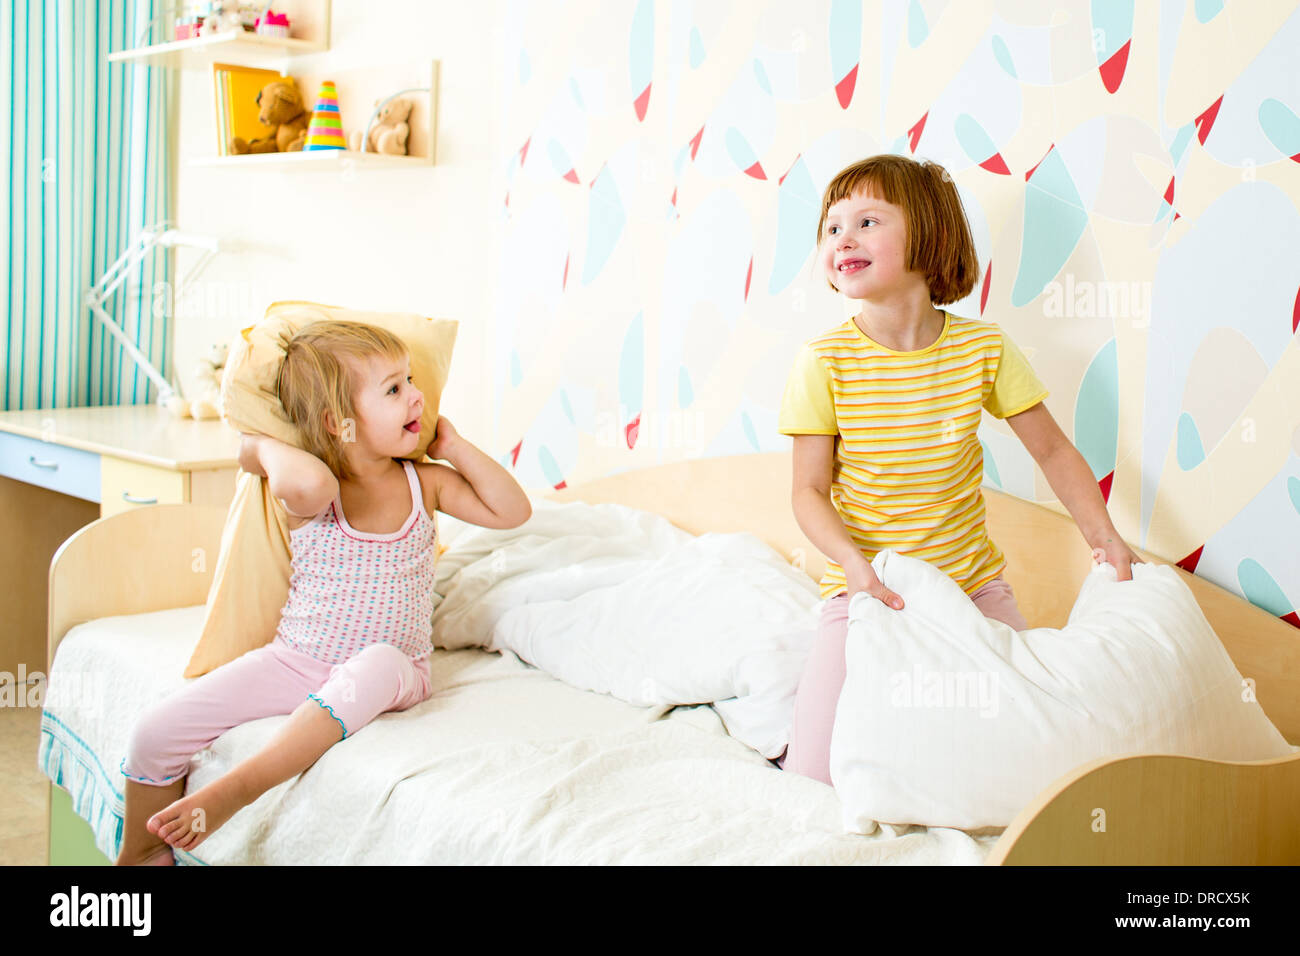 kids sisters playing on the bed indoors Stock Photo